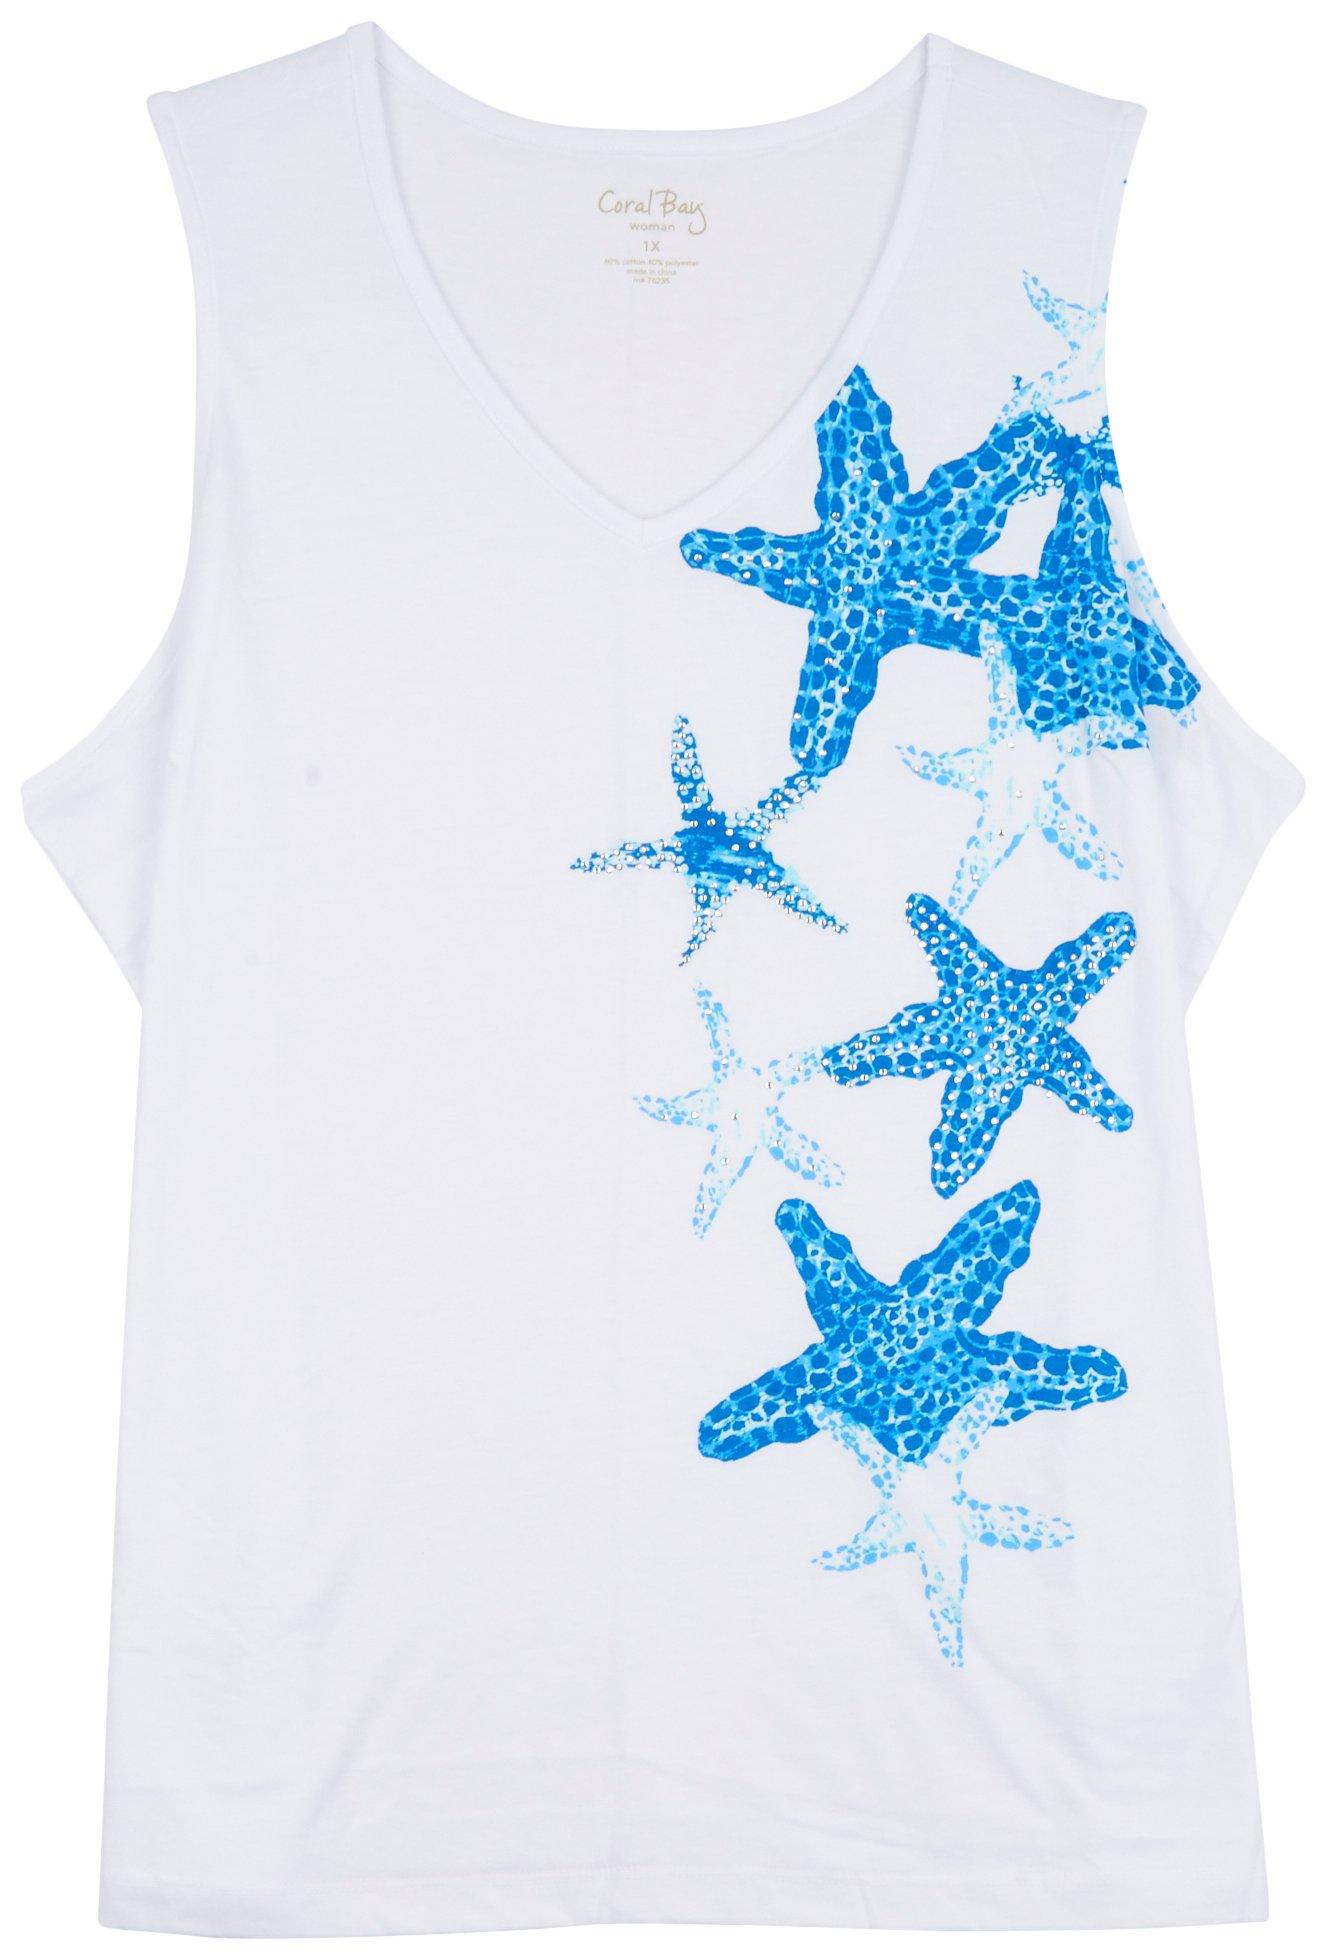 Coral Bay Plus Embellished Star Fish  Sleeveless Top